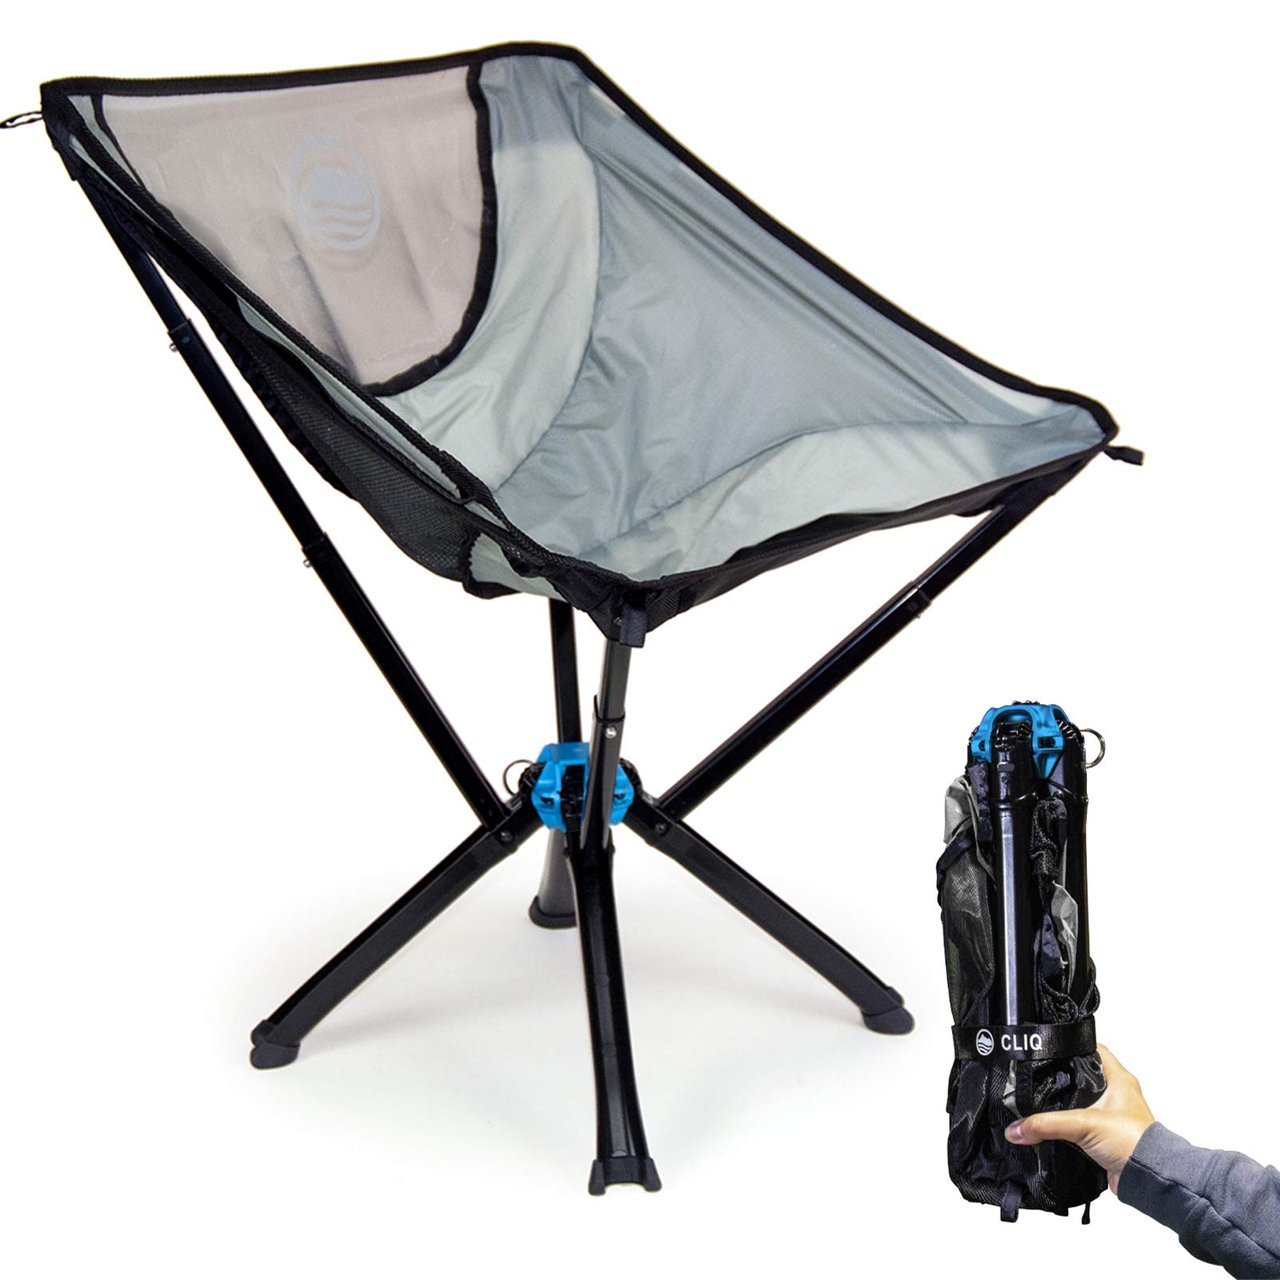 1 Cliq Camping Chair - Most Funded Portable Chair in Crowdfunding History. Bottle Sized Compact Outdoor Chair Sets up in 5 Seconds Supports 300lbs Aircraft Grade Aluminum